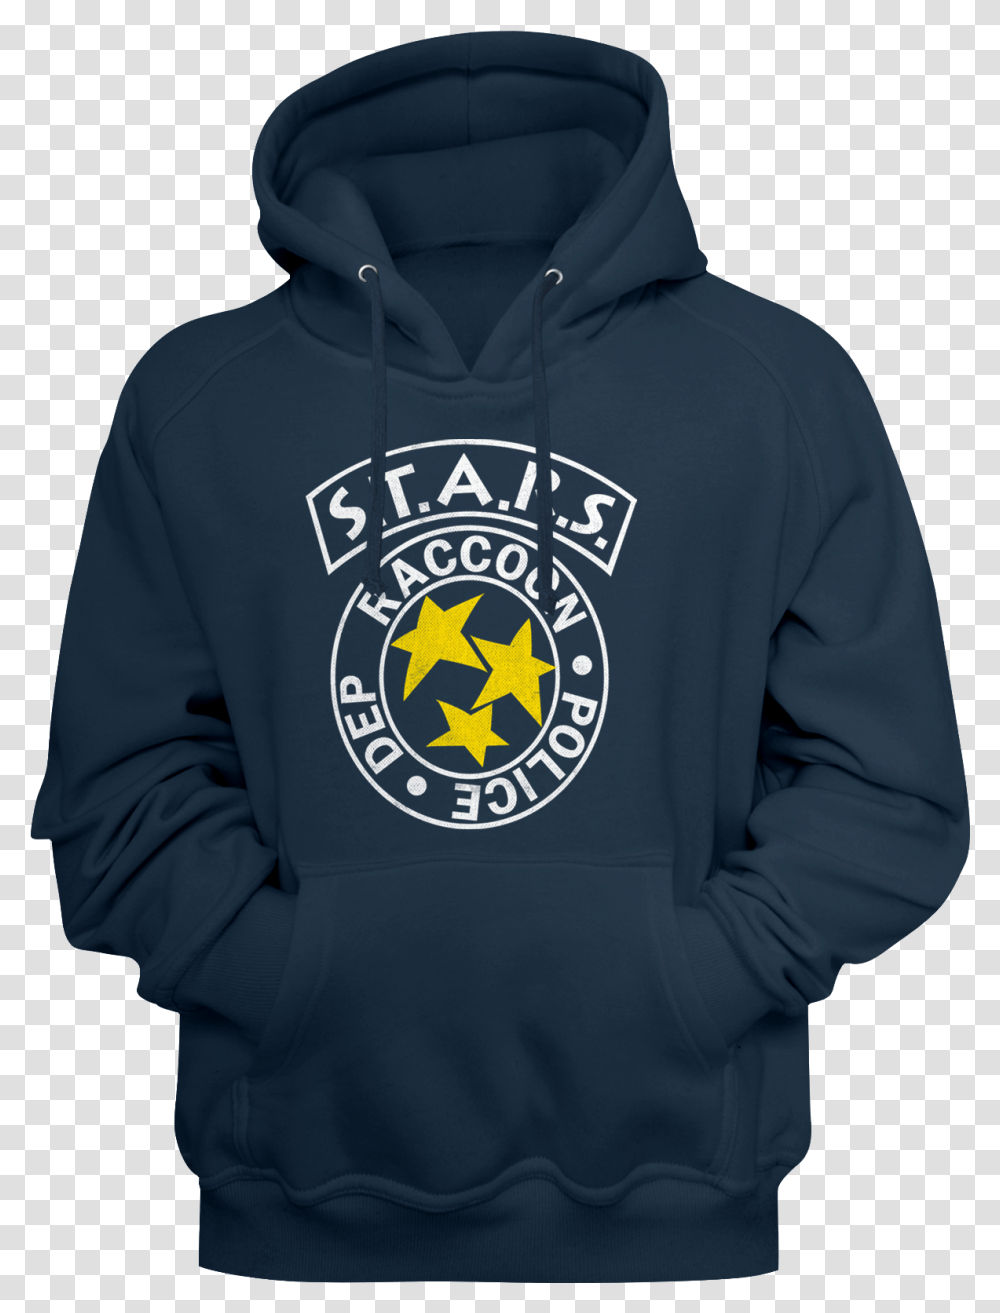 Stars Resident Evil Hoodie Ladies Funny Christmas Shirts, Clothing, Apparel, Sweatshirt, Sweater Transparent Png